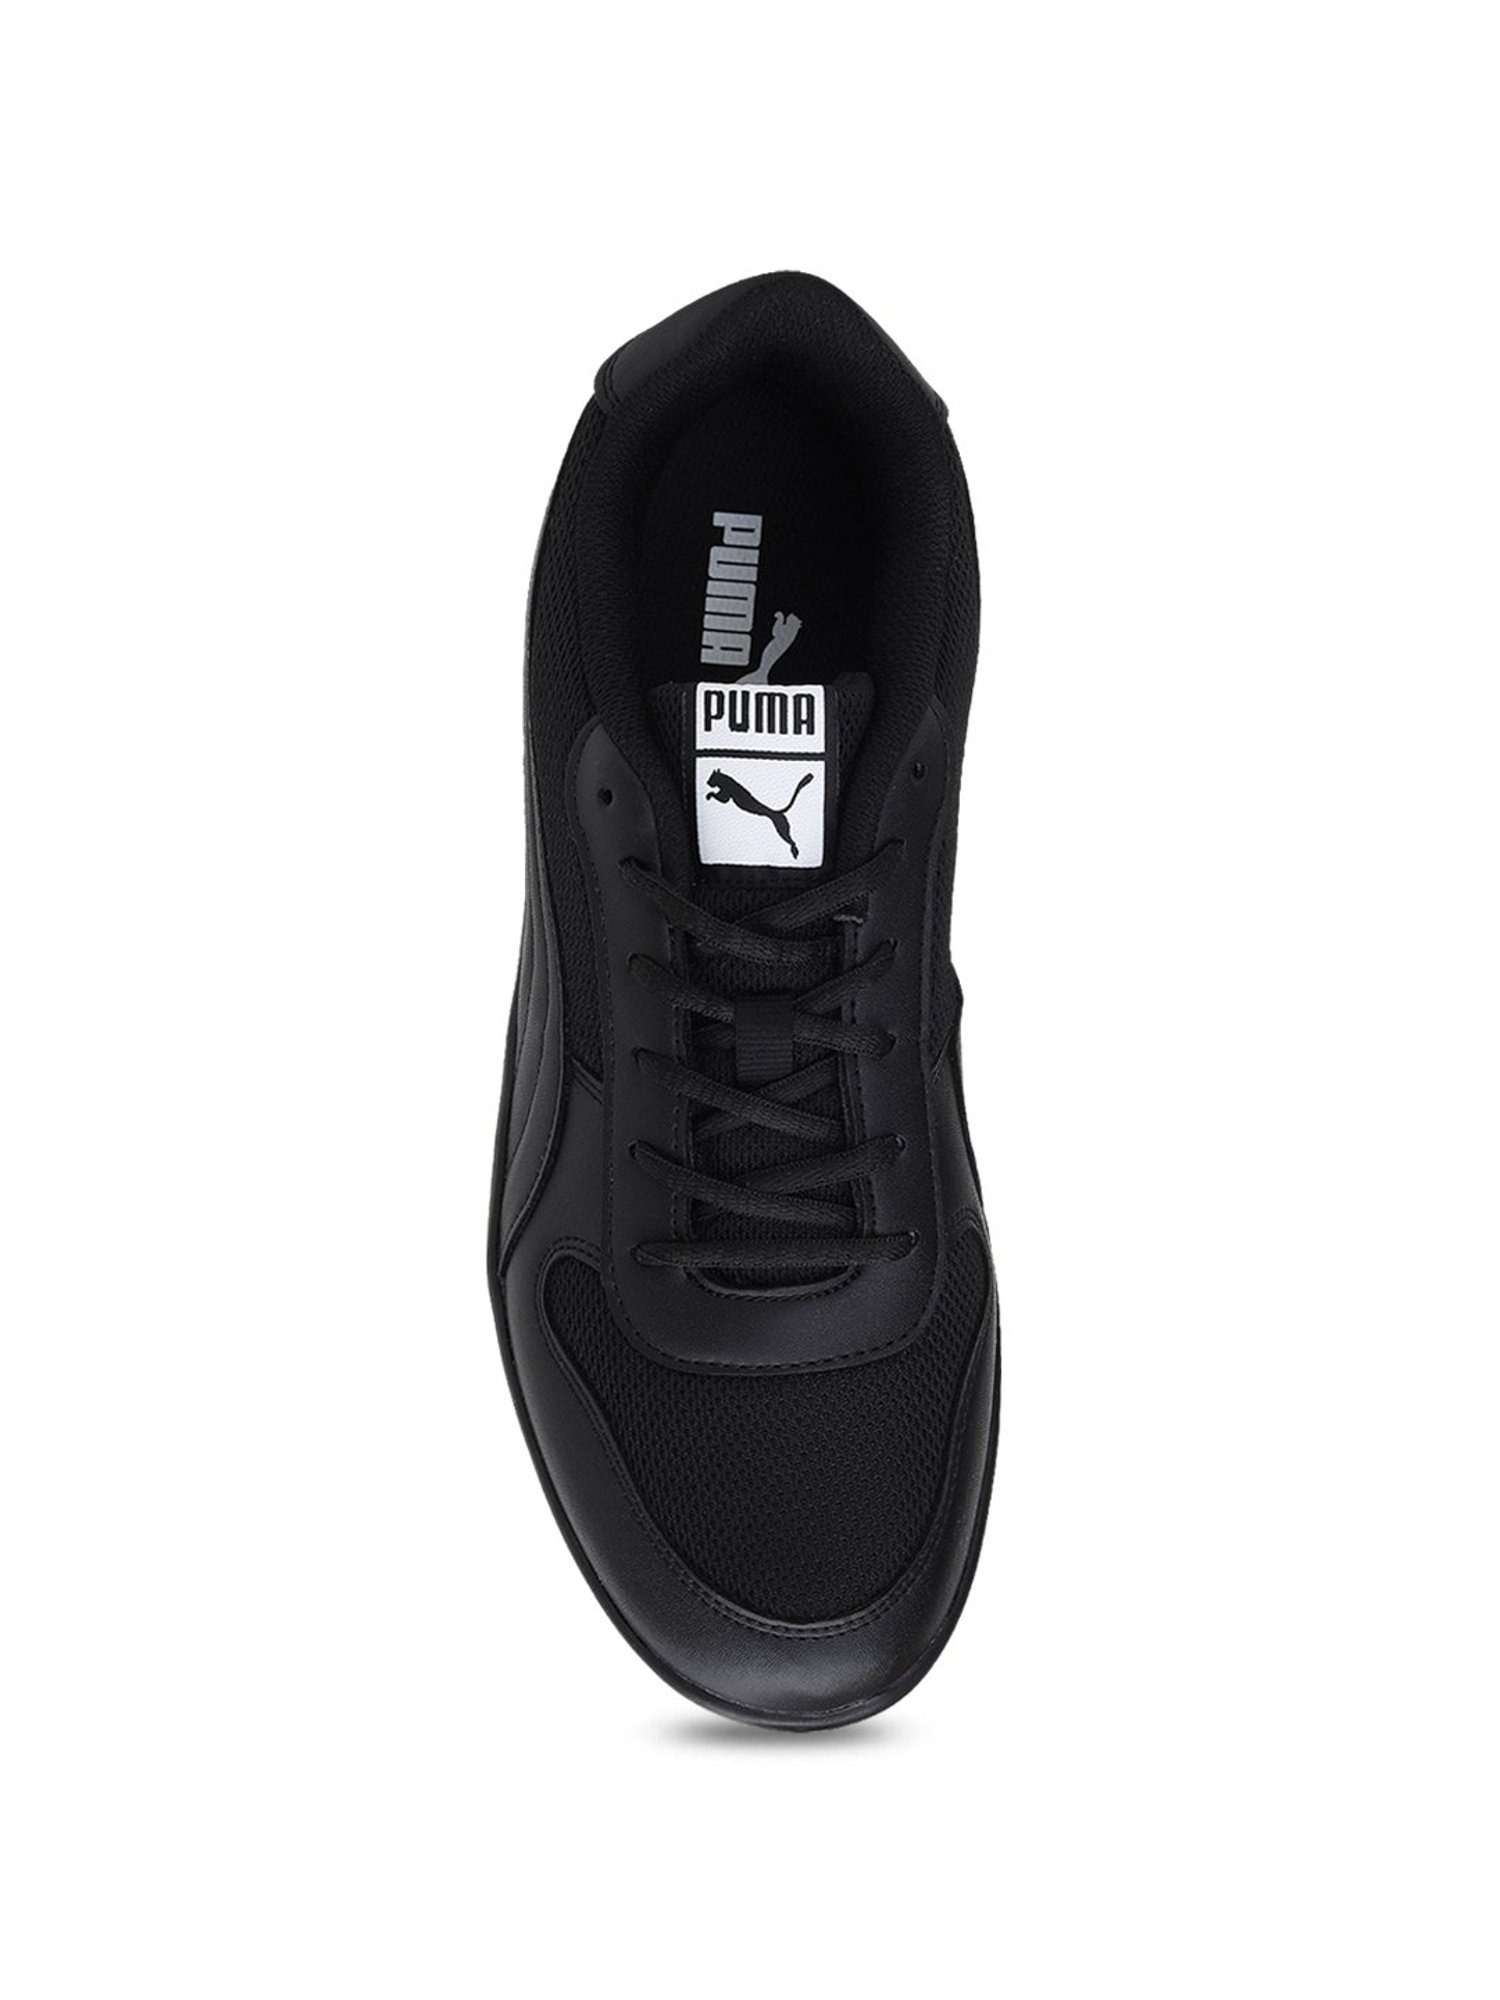 Puma Ignite Limitless Shoe - Men's Shoes in Puma Black Puma Black | Buckle  | Mens puma shoes, Puma ignite limitless, Sneakers men fashion